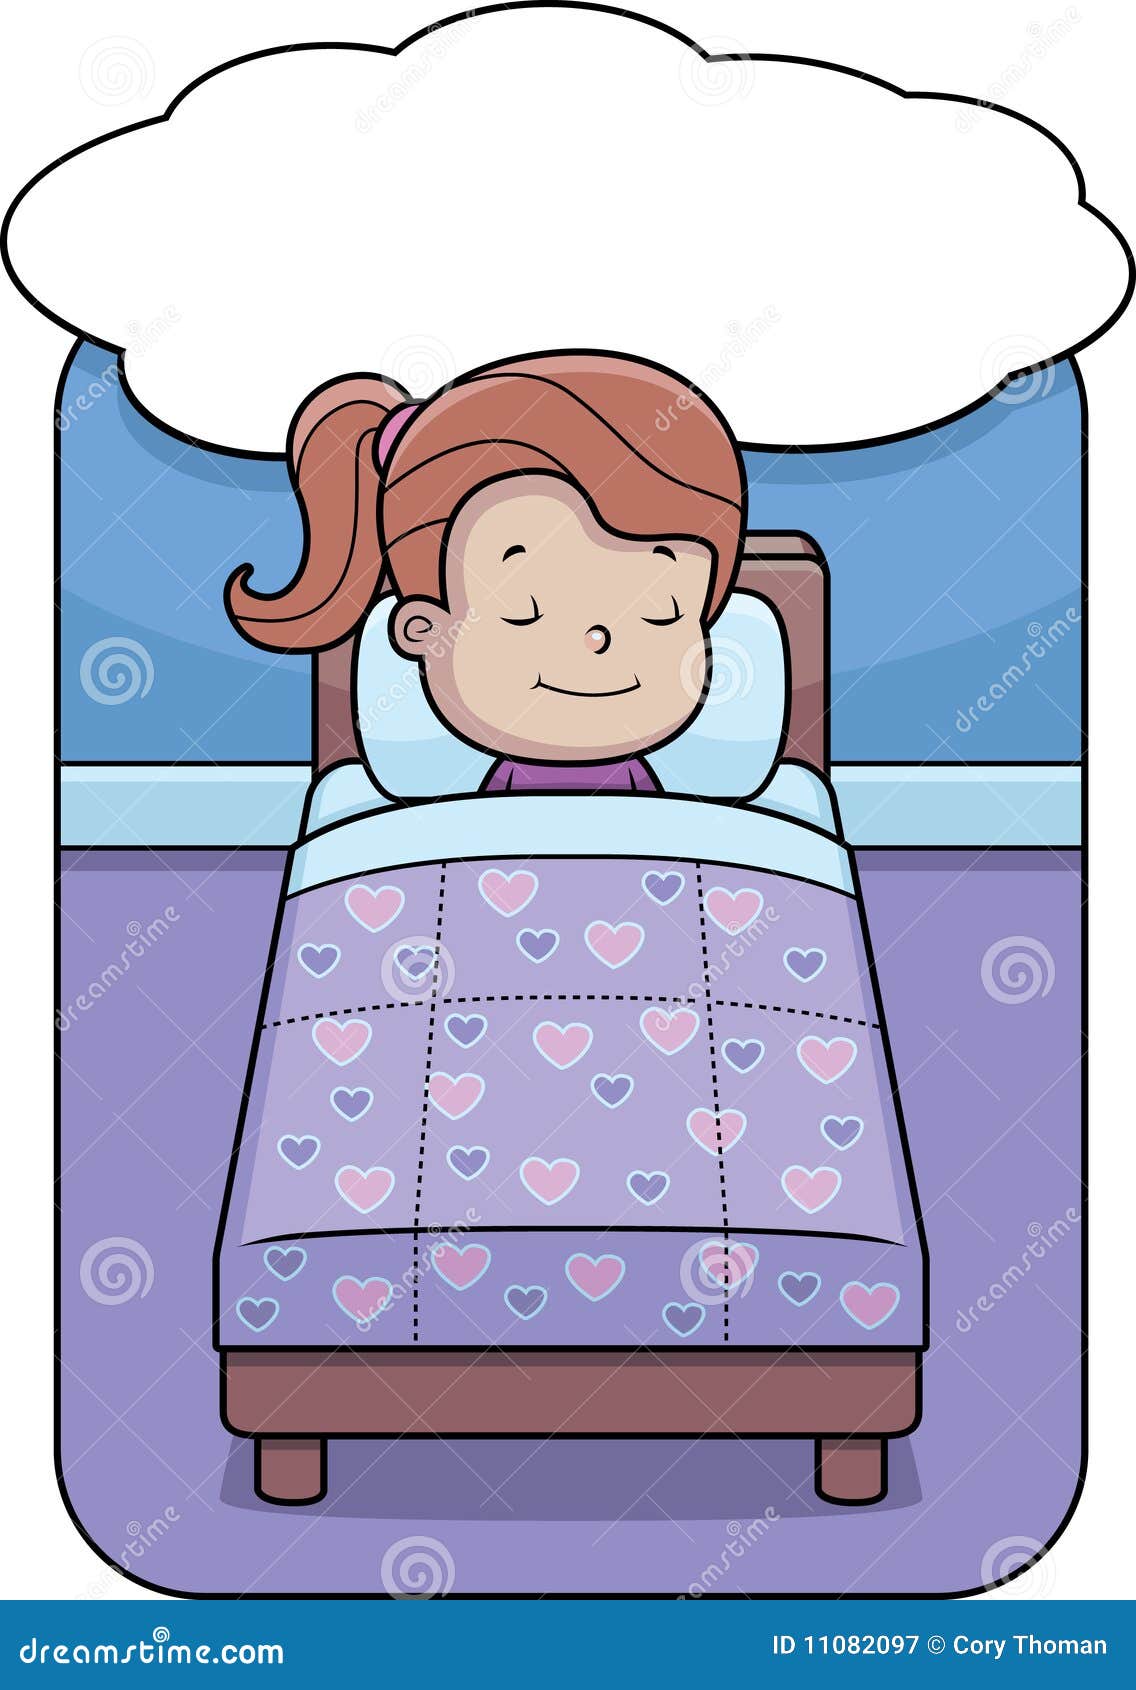 cartoon girl in bed sleeping and dreaming.